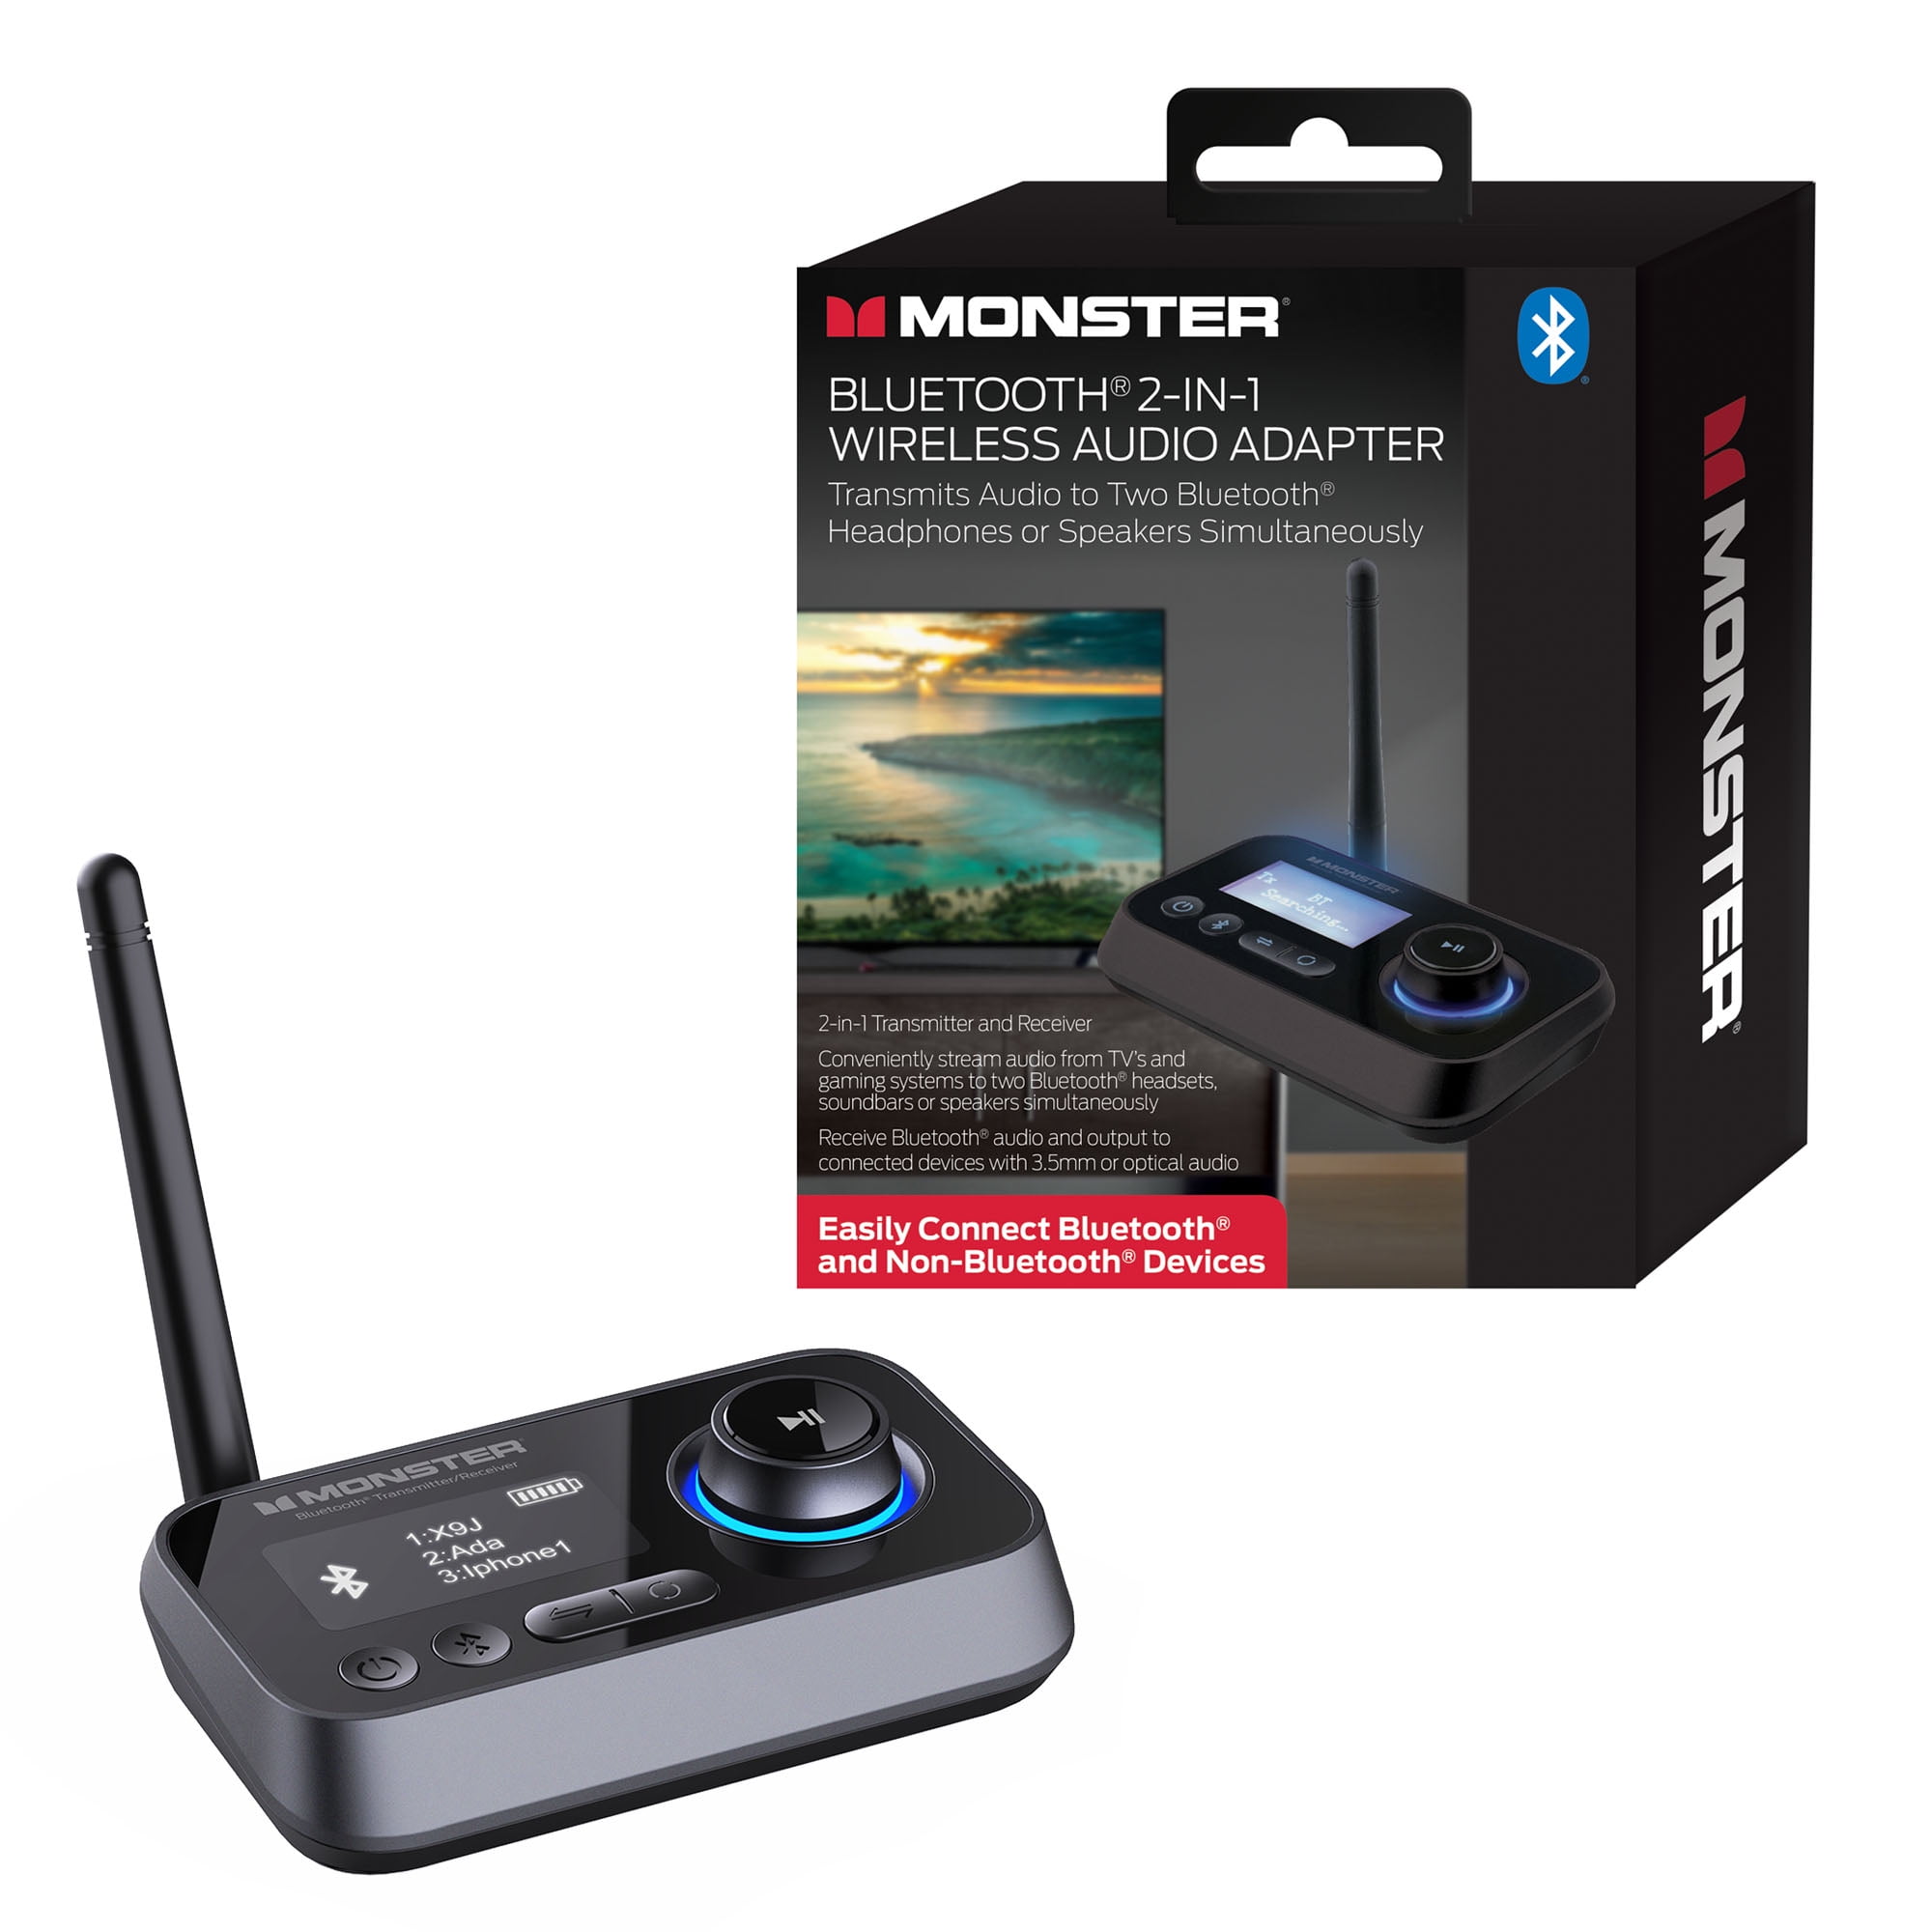 Monster LED 2 in 1 Bluetooth Wireless Audio Adapter, Transmitter Receiver, Turn Non-Bluetooth Devices Compatible, Size: One Size